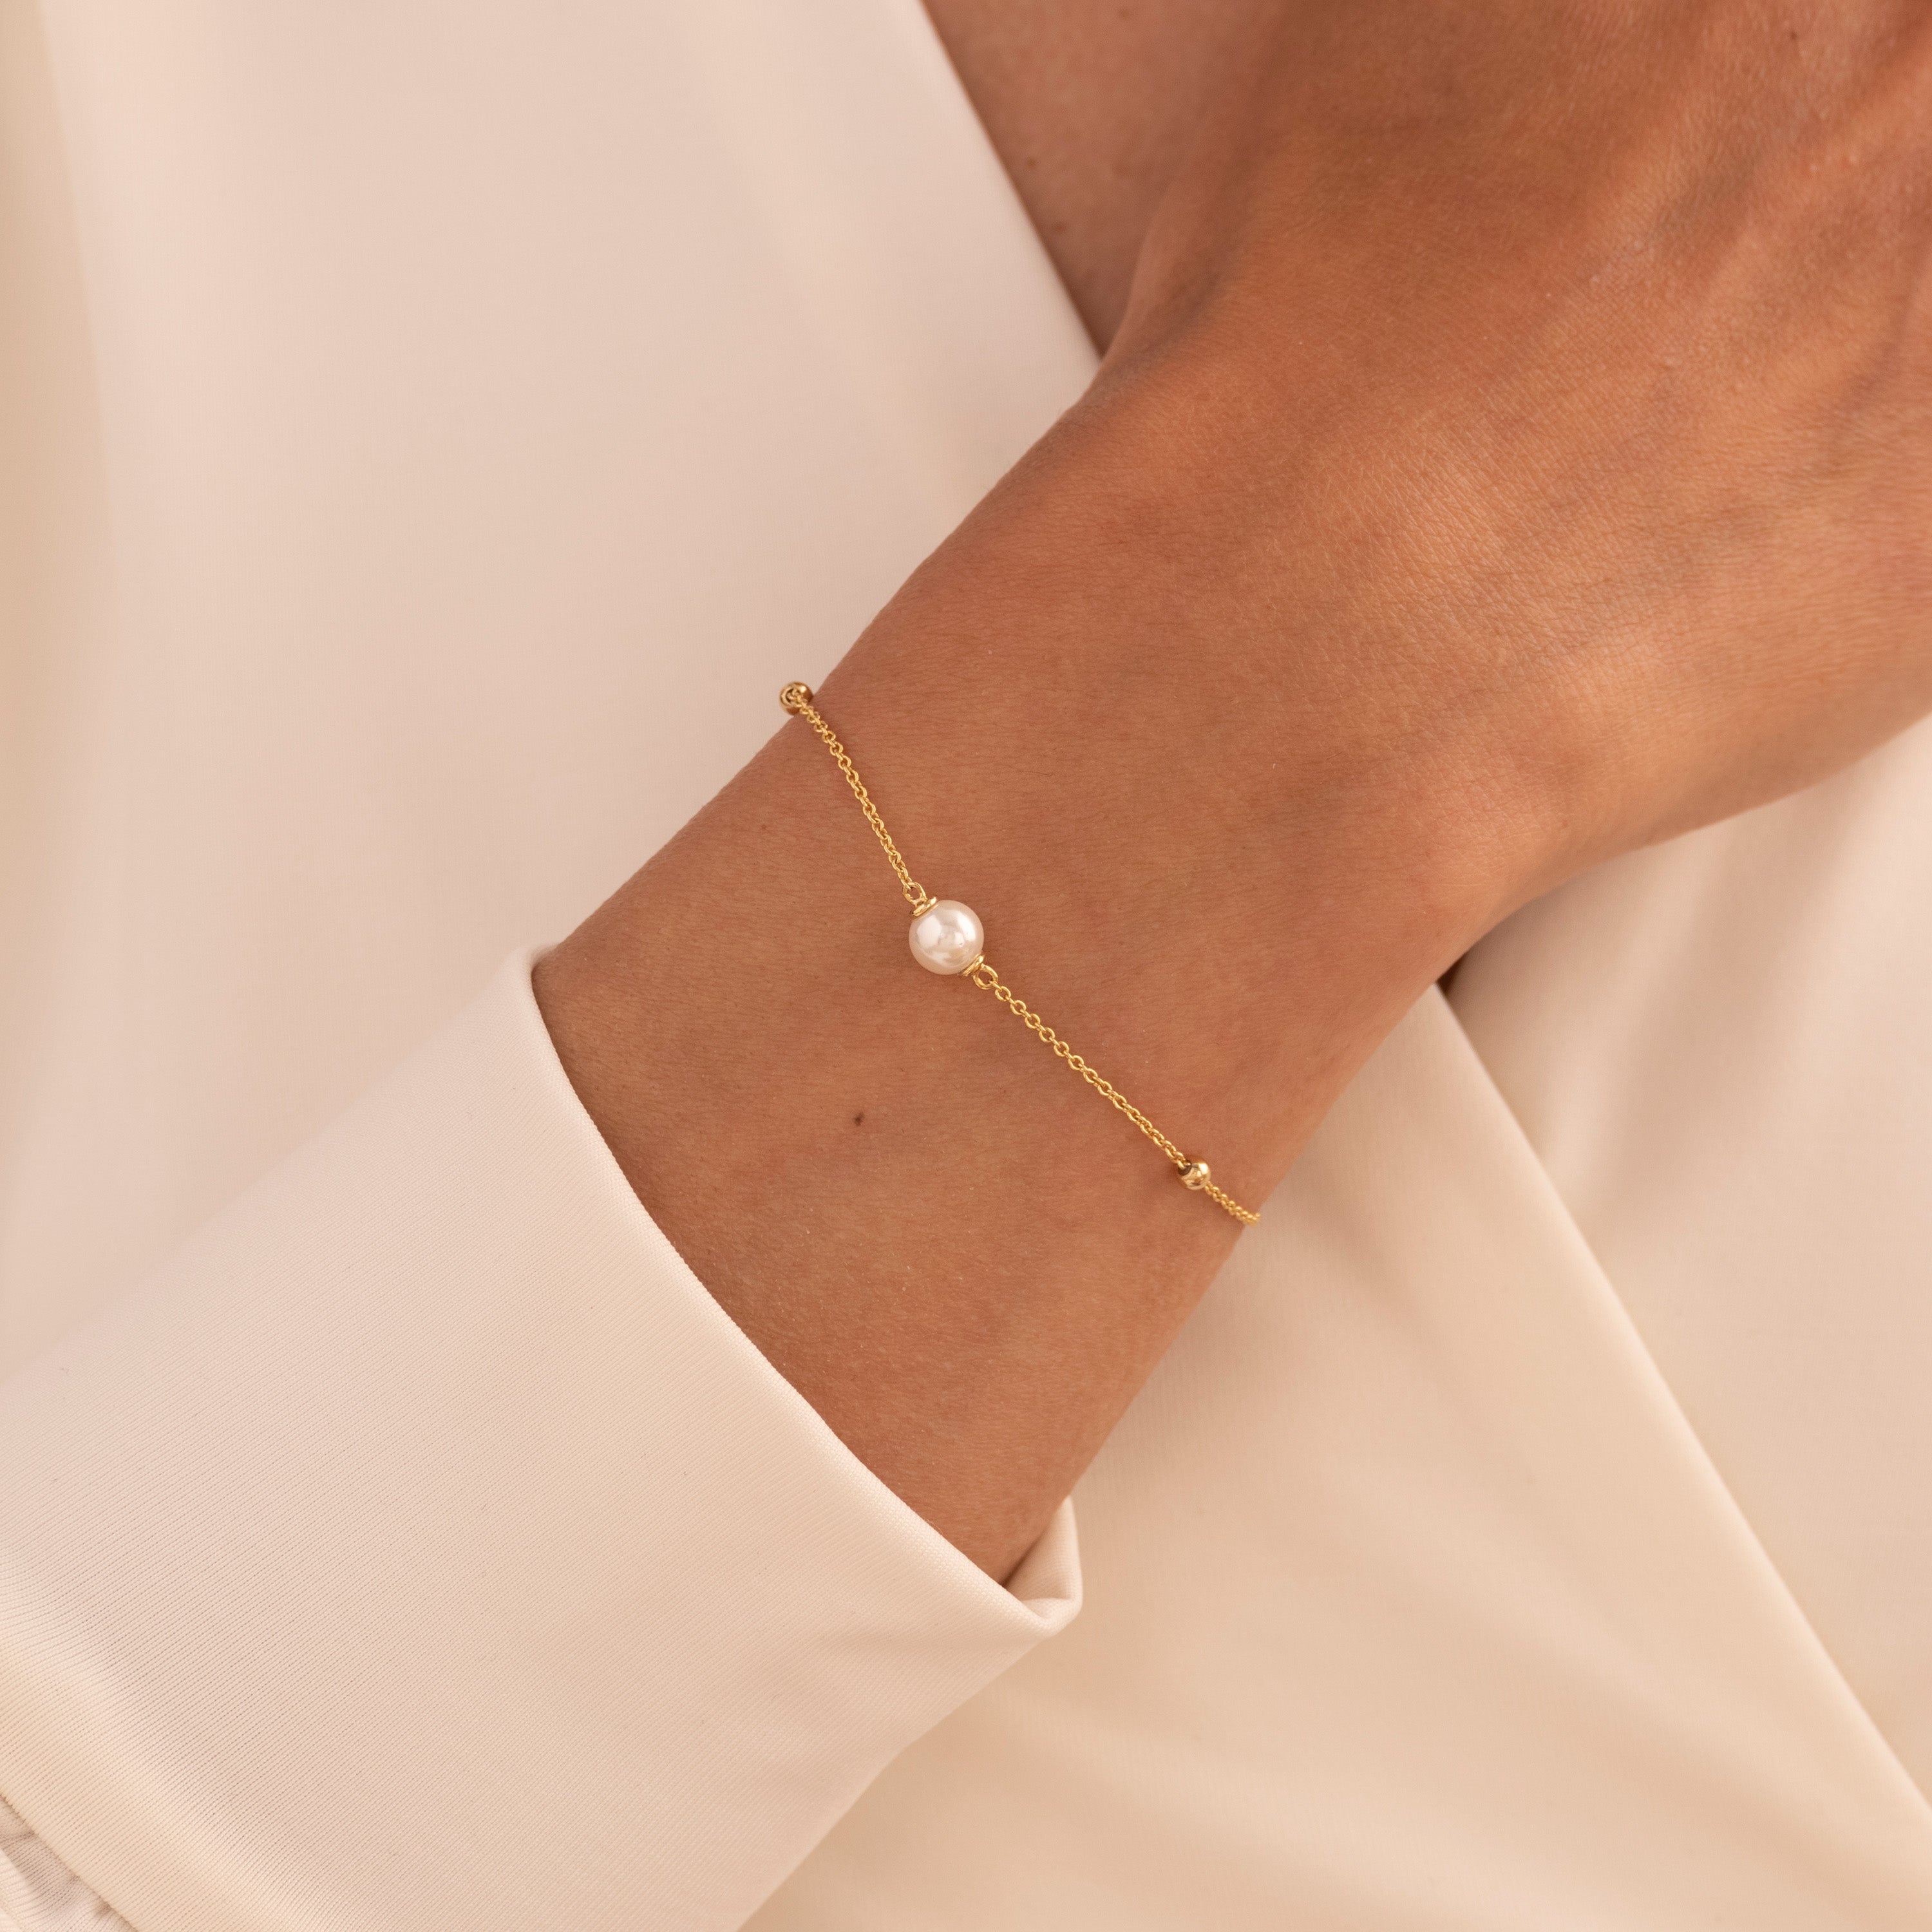 Gisser Jewels Gold Bracelet with Beads and Pearl